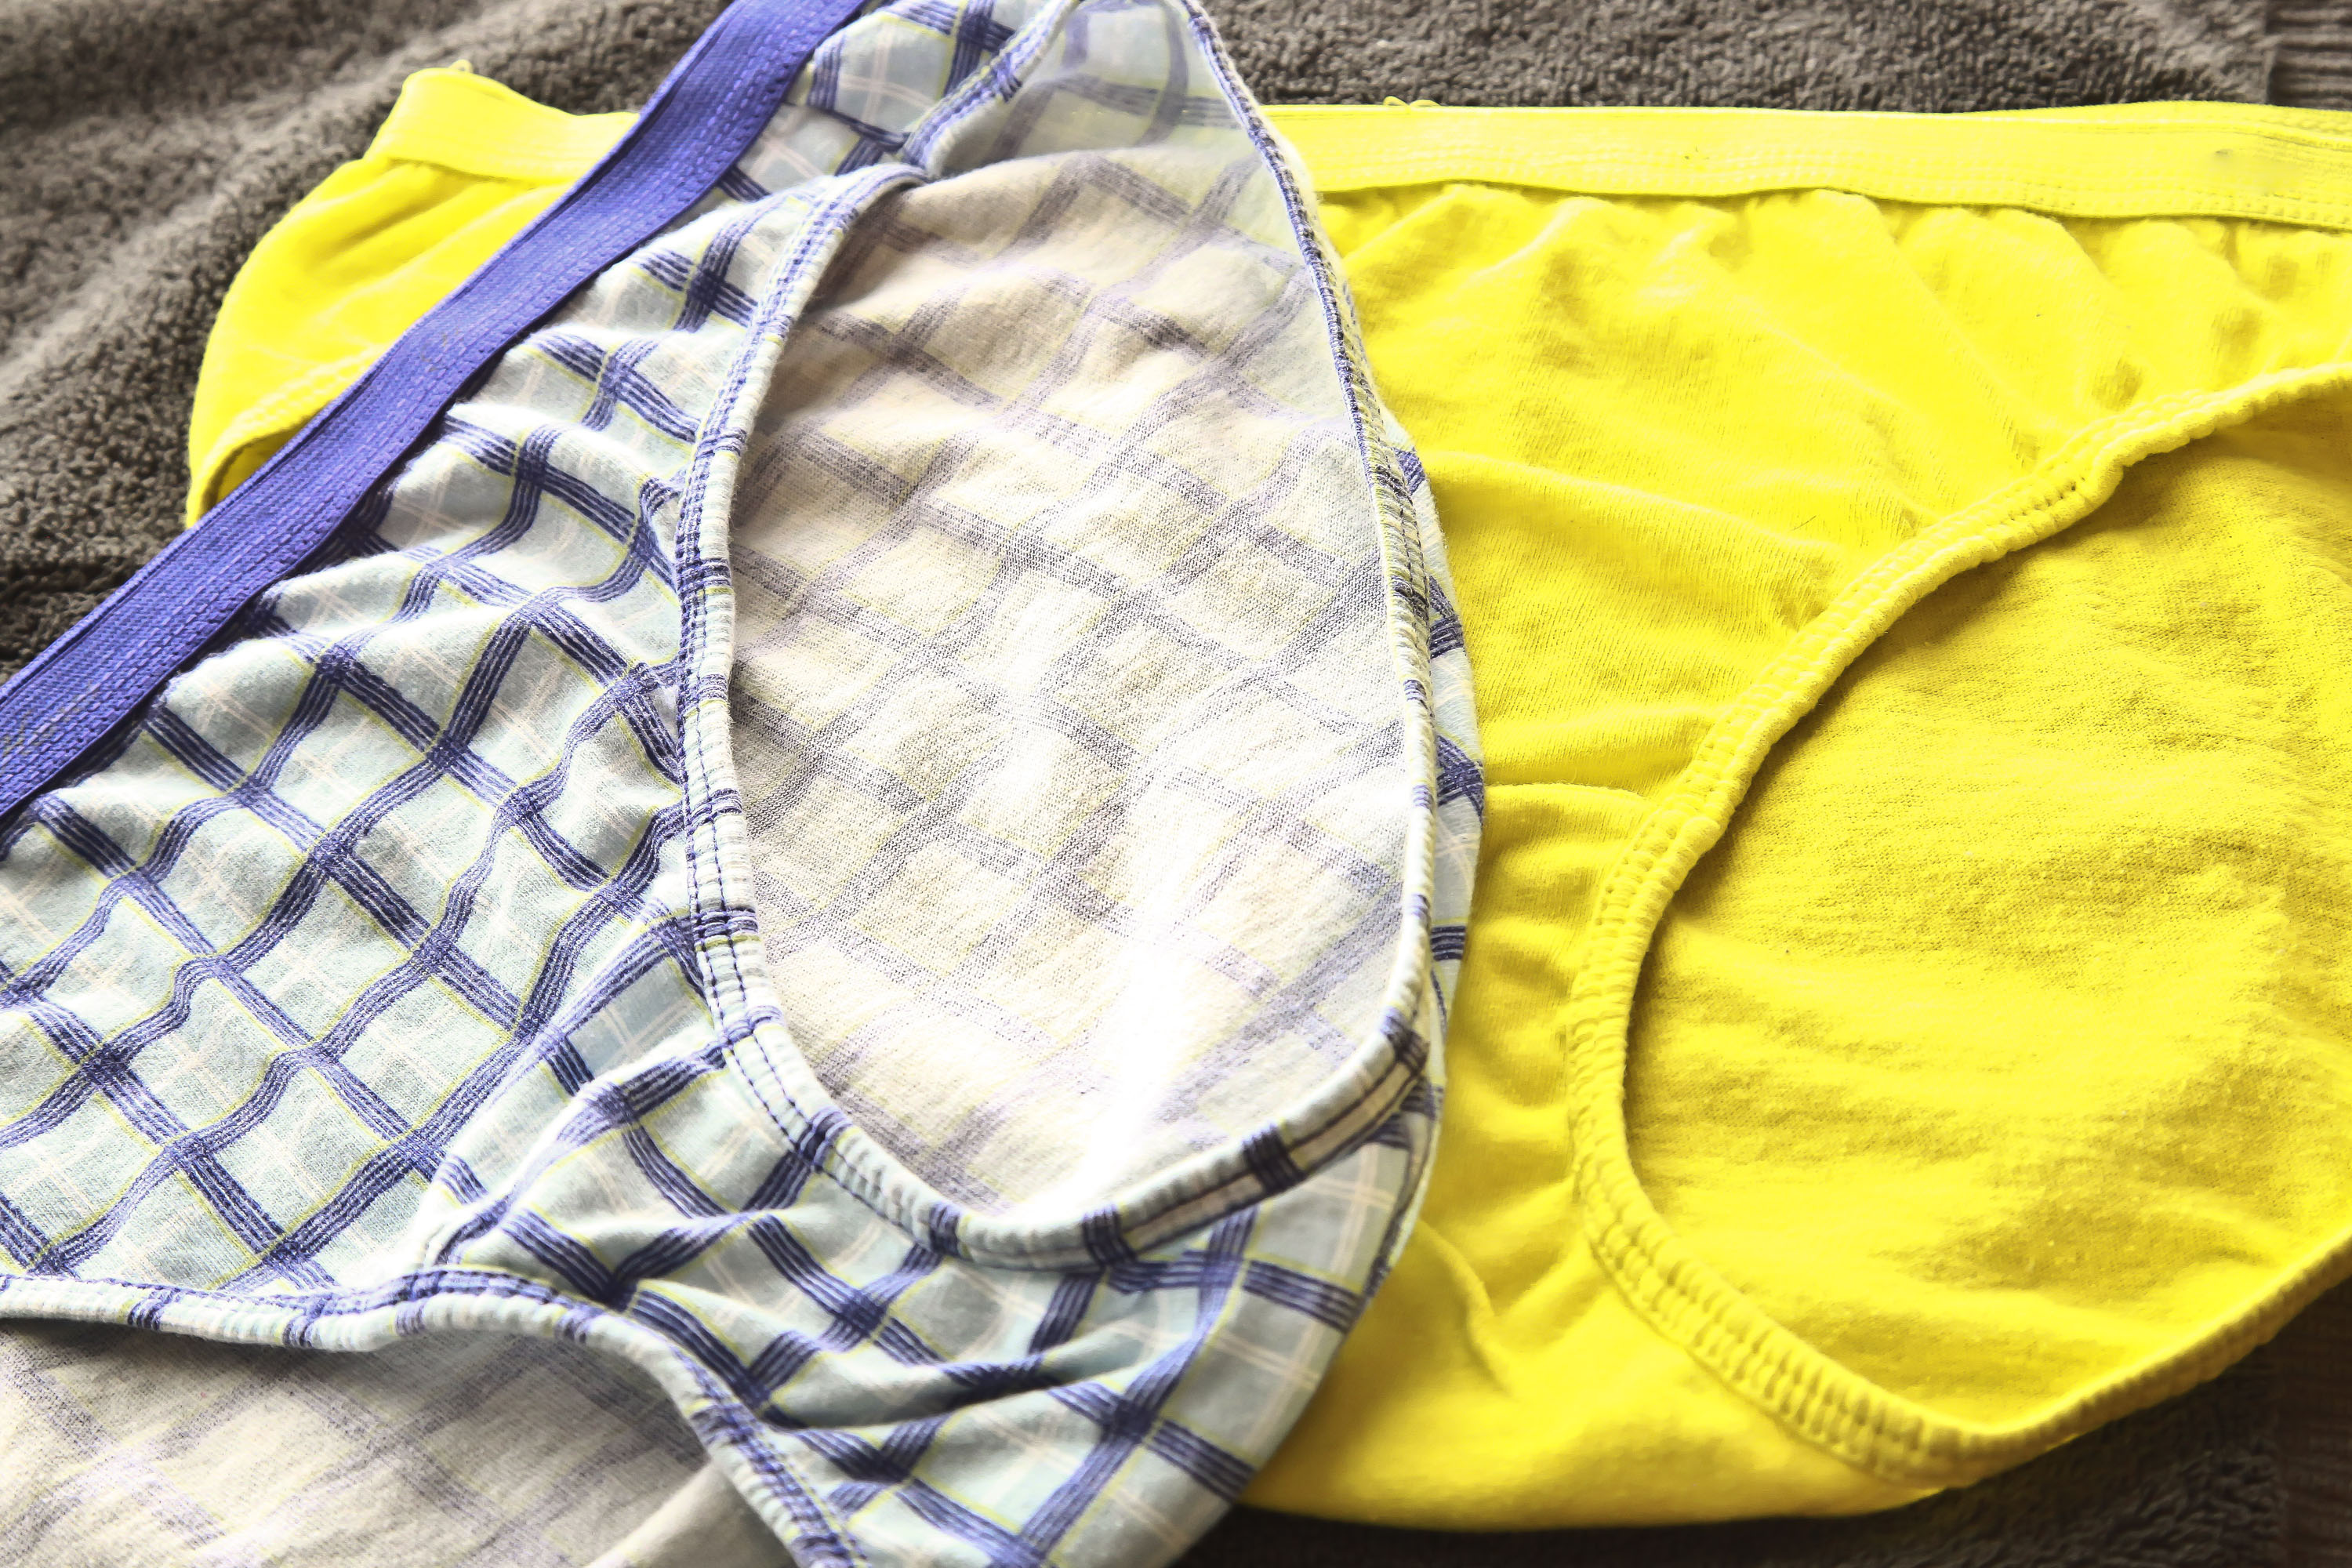 How to clean feces stains from underwear - Quora